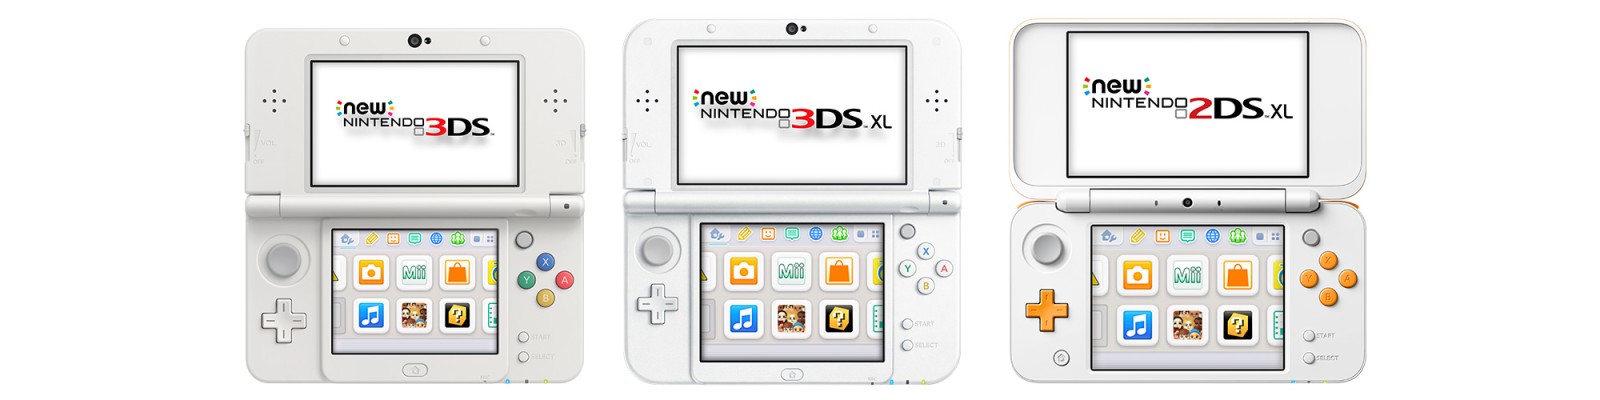 New Nintendo 3DS Family Support | Support | Nintendo